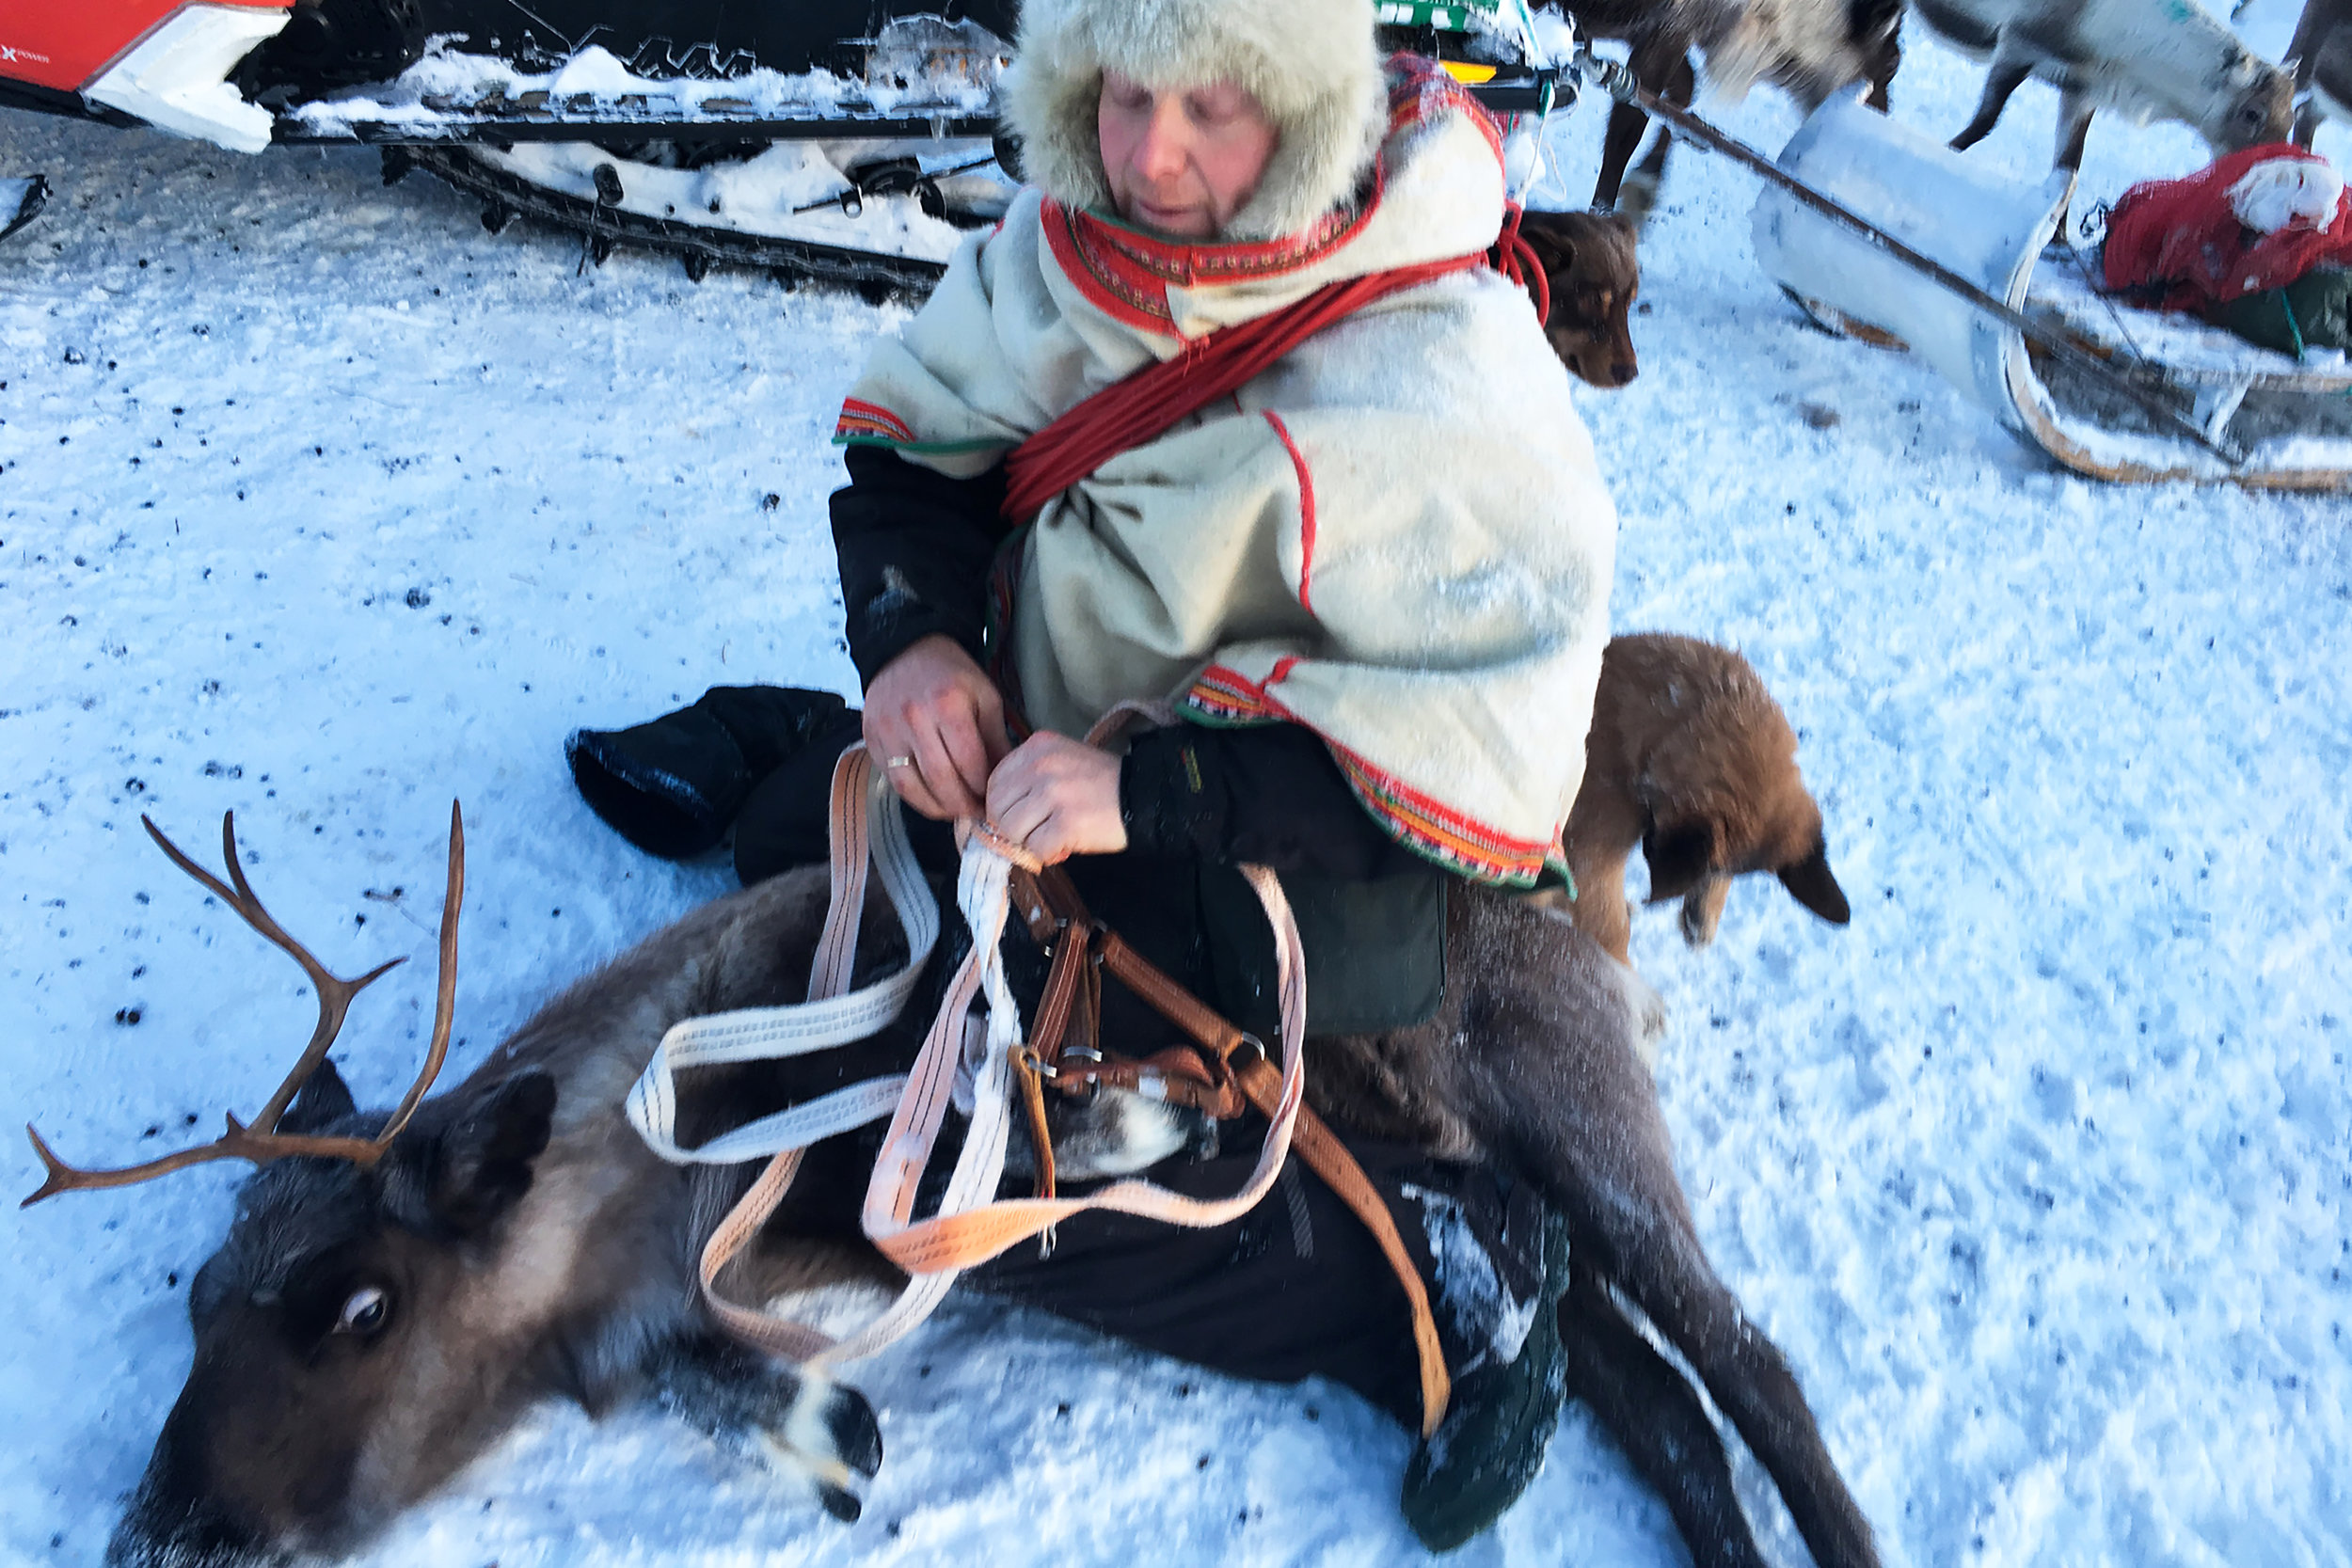 Reiulf Aleksandersen ties + secures sick reindeer to take back to the main house for extra care